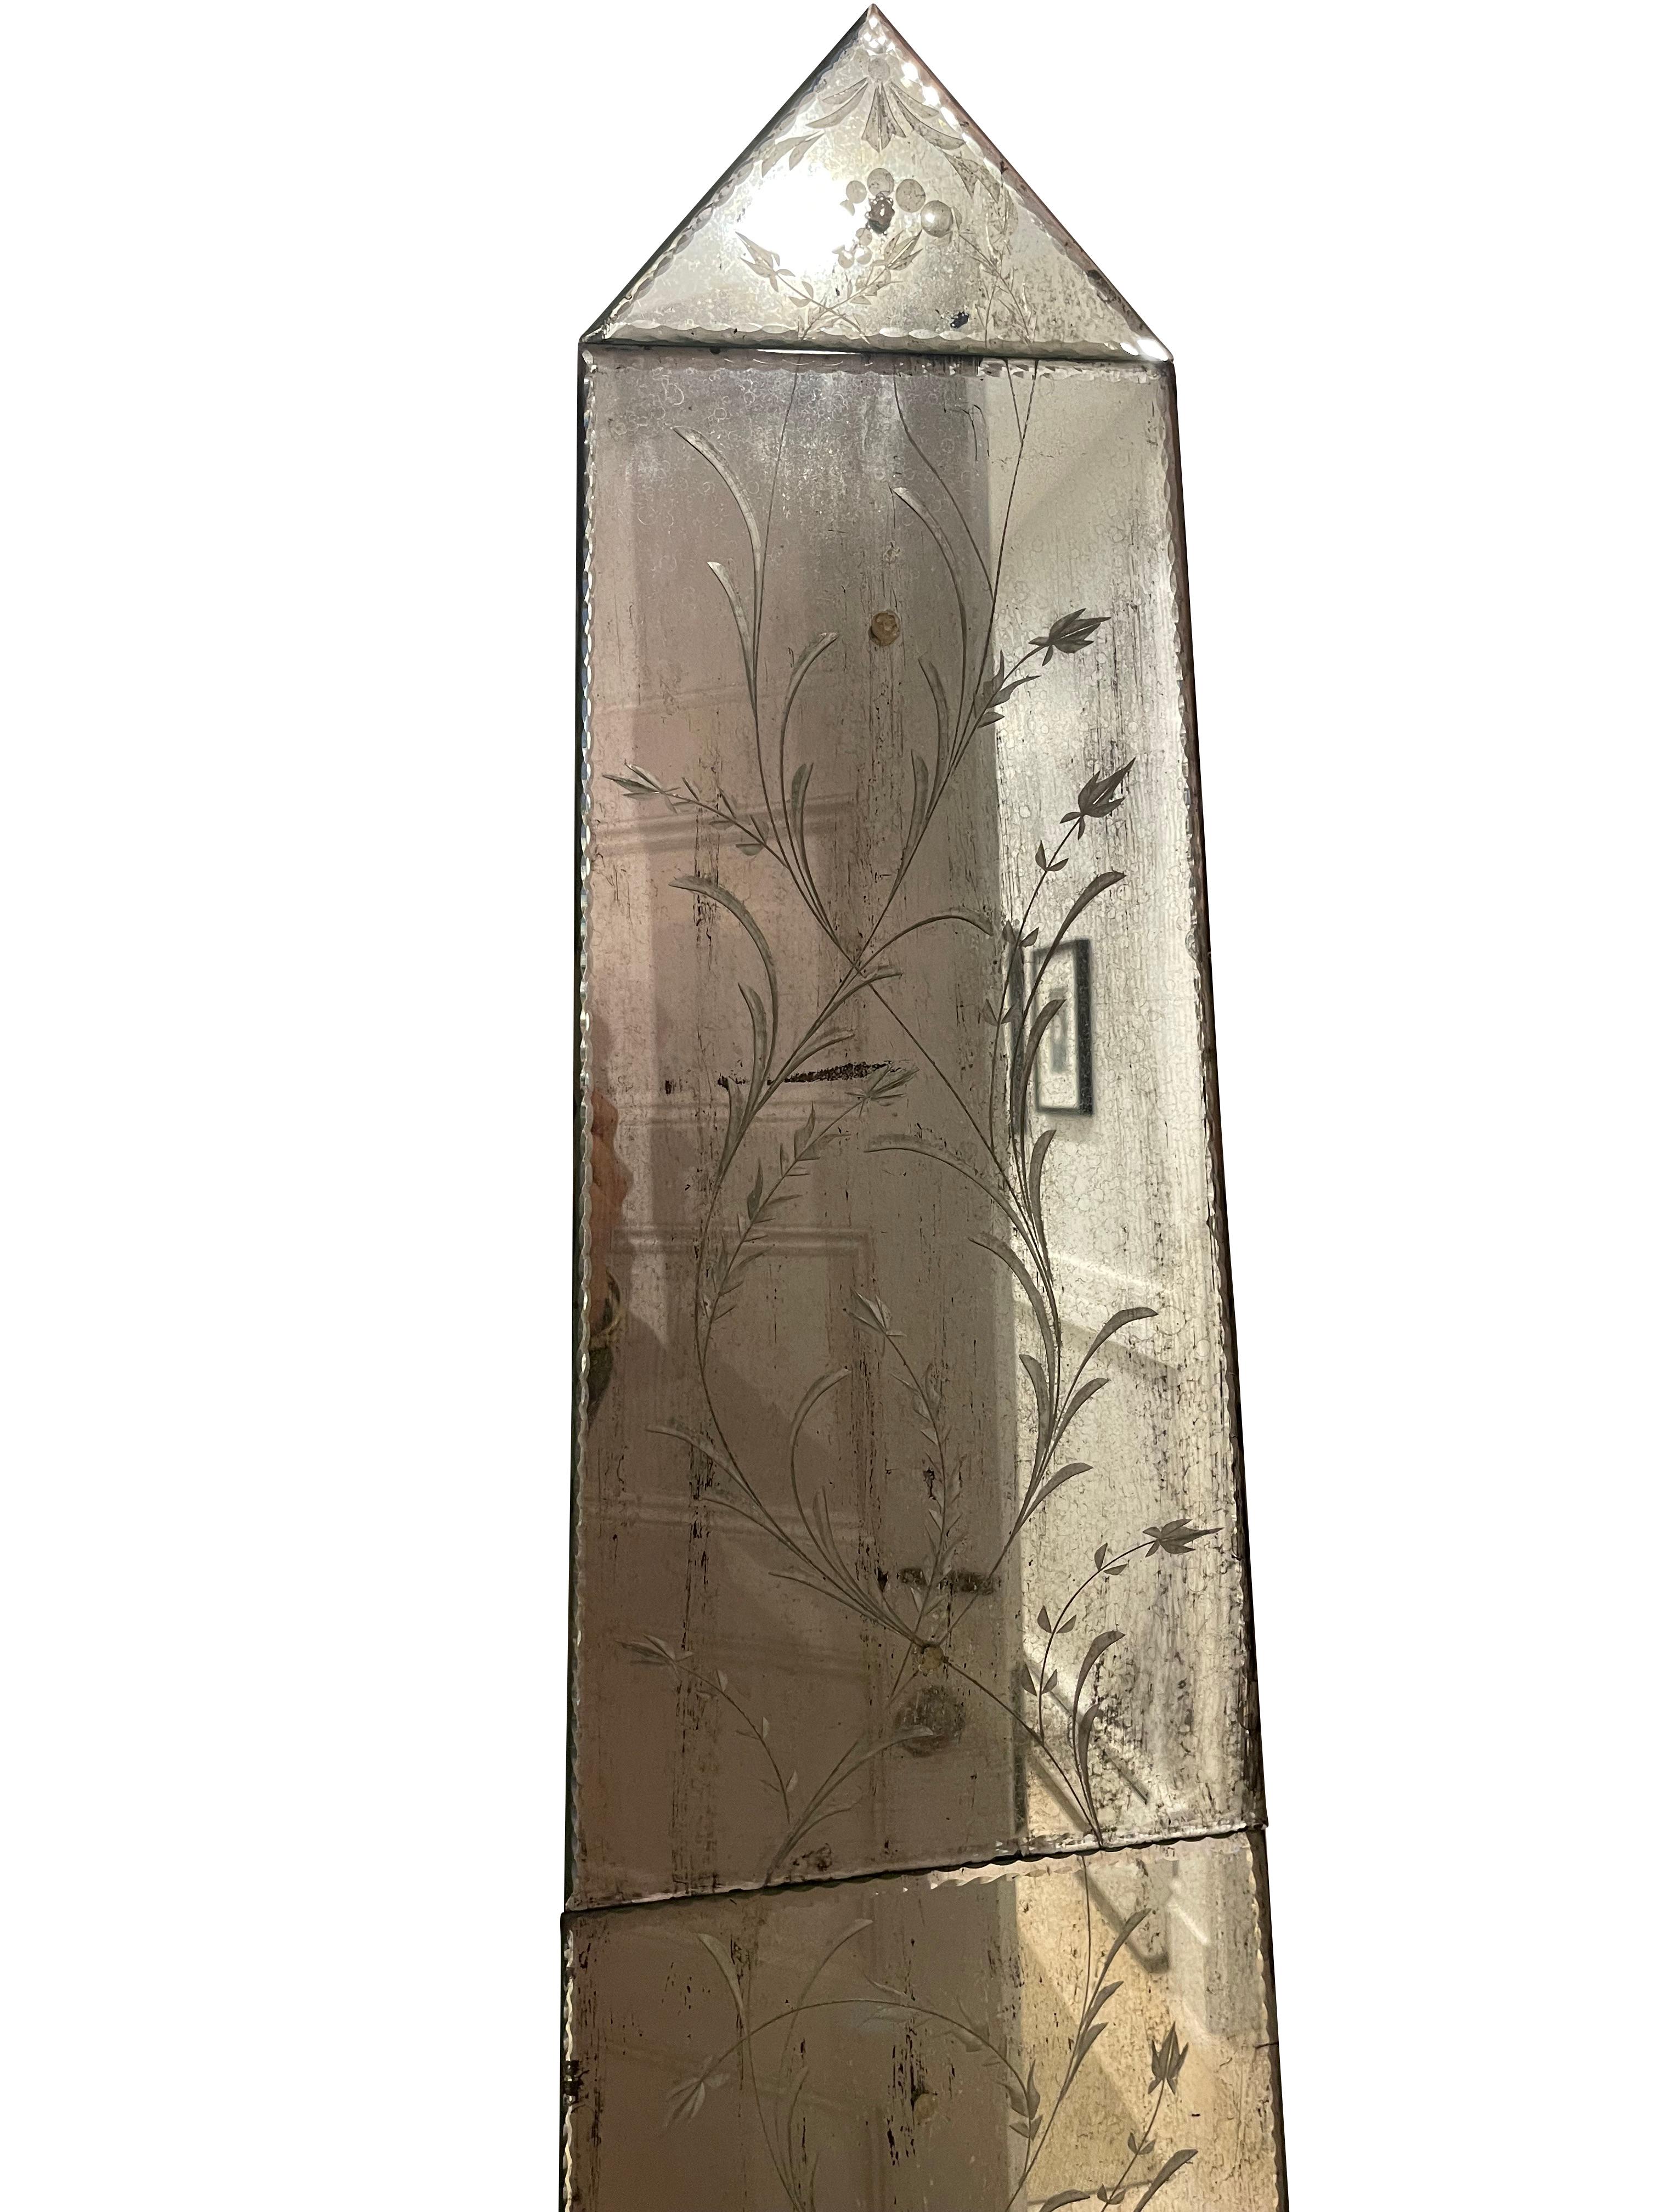 Italian Pair of Obelisk Mirrored Panels with Botanical Etchings